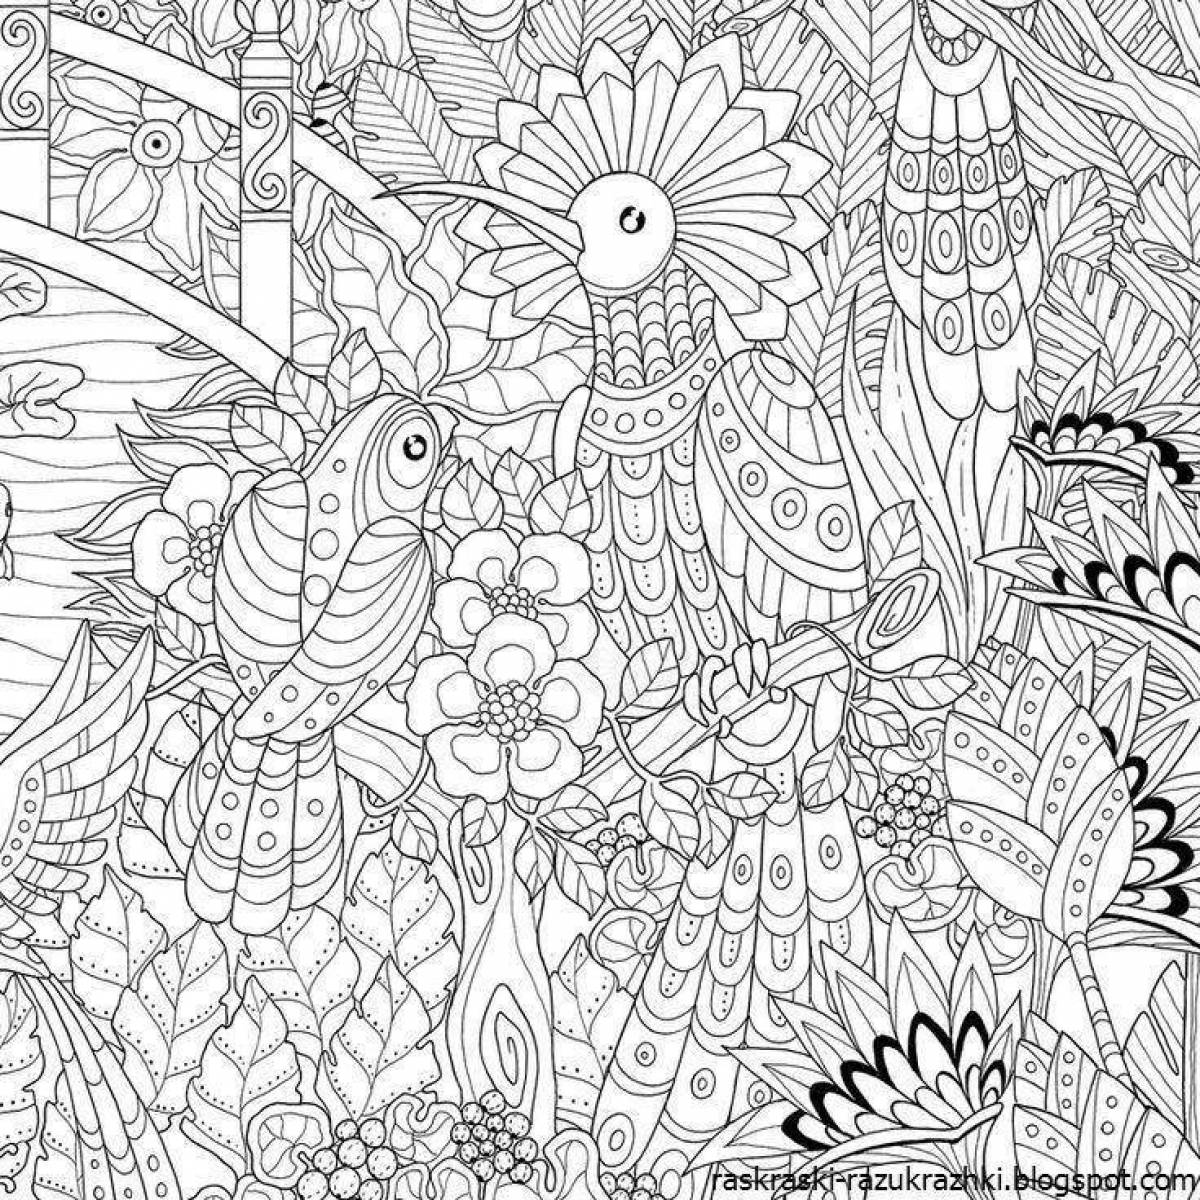 Annoying coloring book for kids